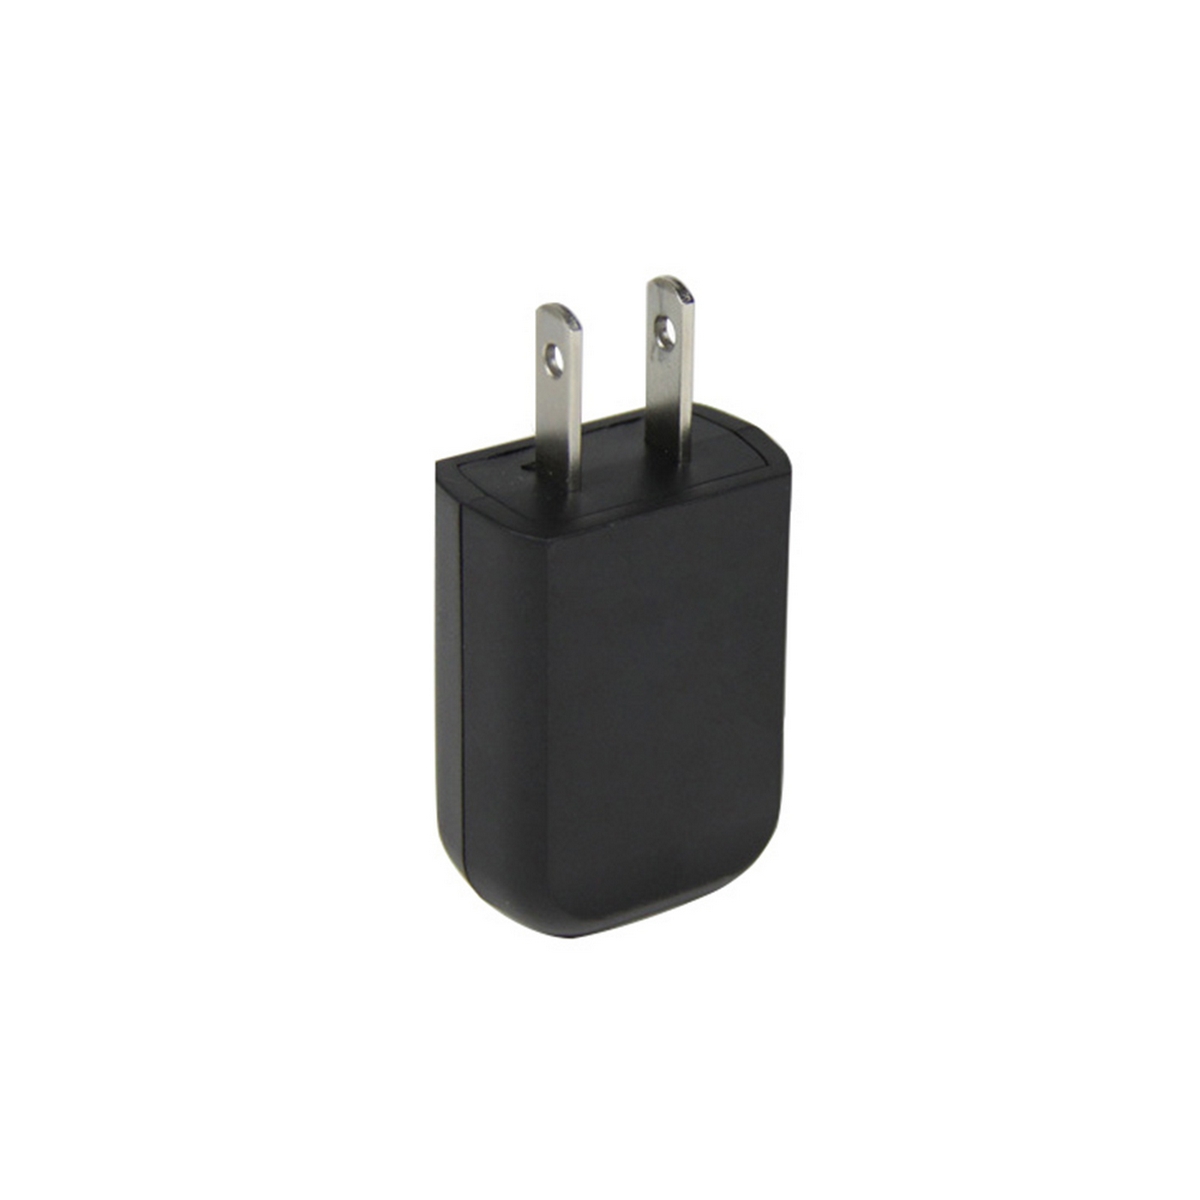 UL Listed USB A/C Wall Charger Adapter